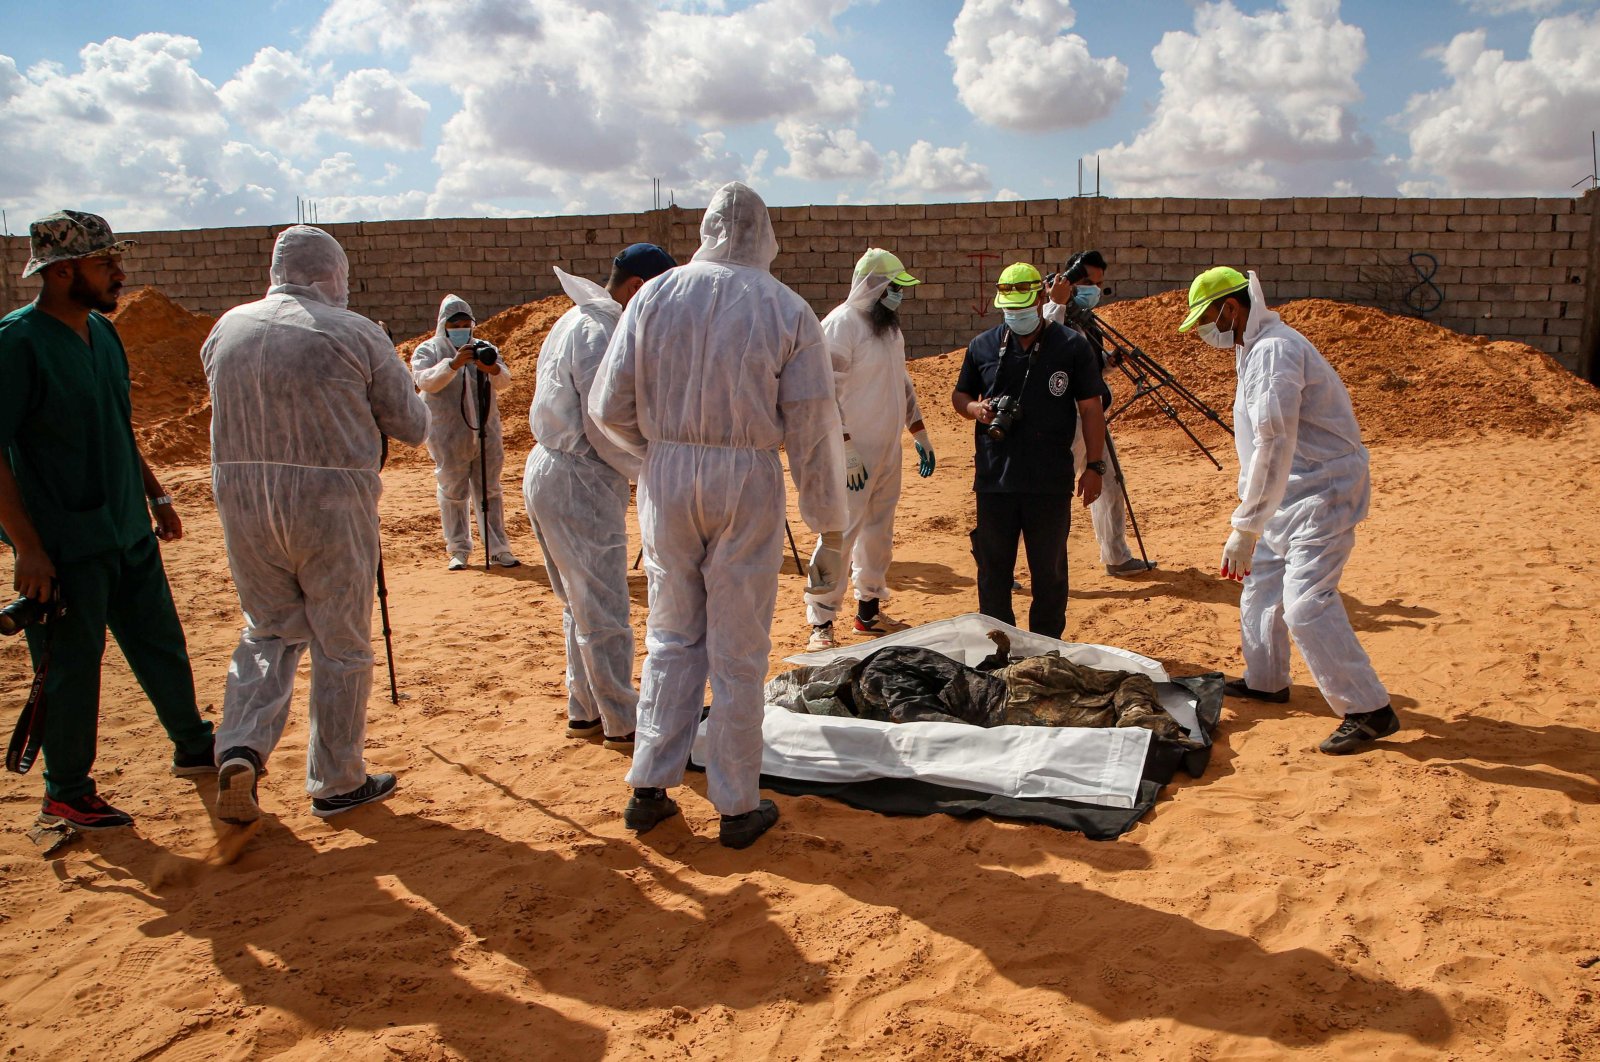 Members of the public body leading the "Search and Identification of the Missing," backed by the U.N.-recognised Government of National Accord (GNA), gather around an unearthed body at a mass grave site in western Libya's Tarhuna region on Nov. 7, 2020.